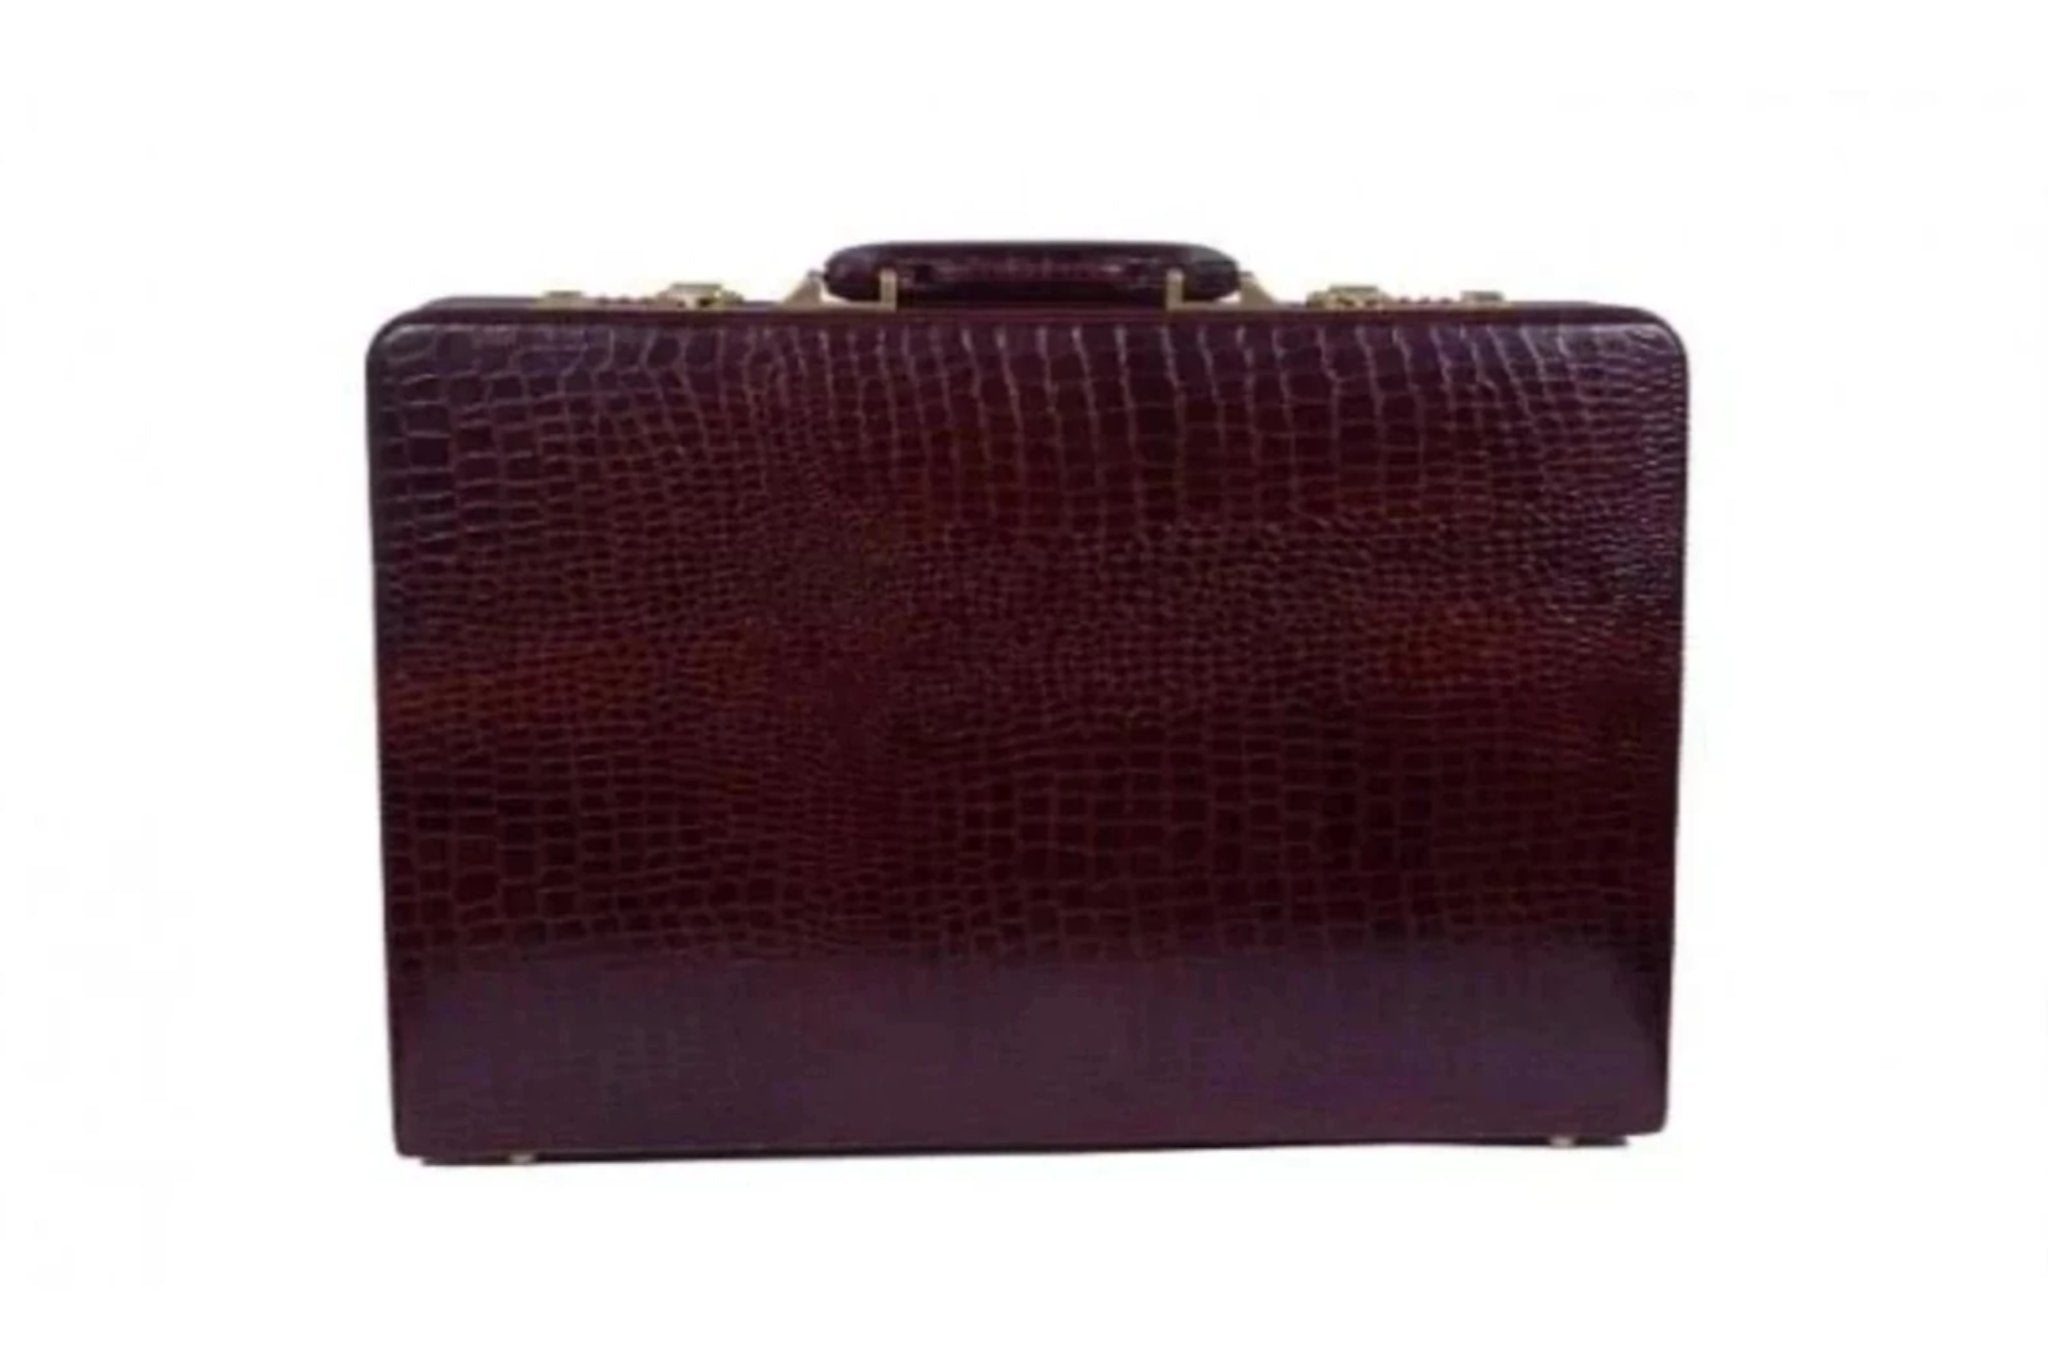 Heritage Ben Nevis Lid Over Attache Case with Multi Pockets, Crocodile Print